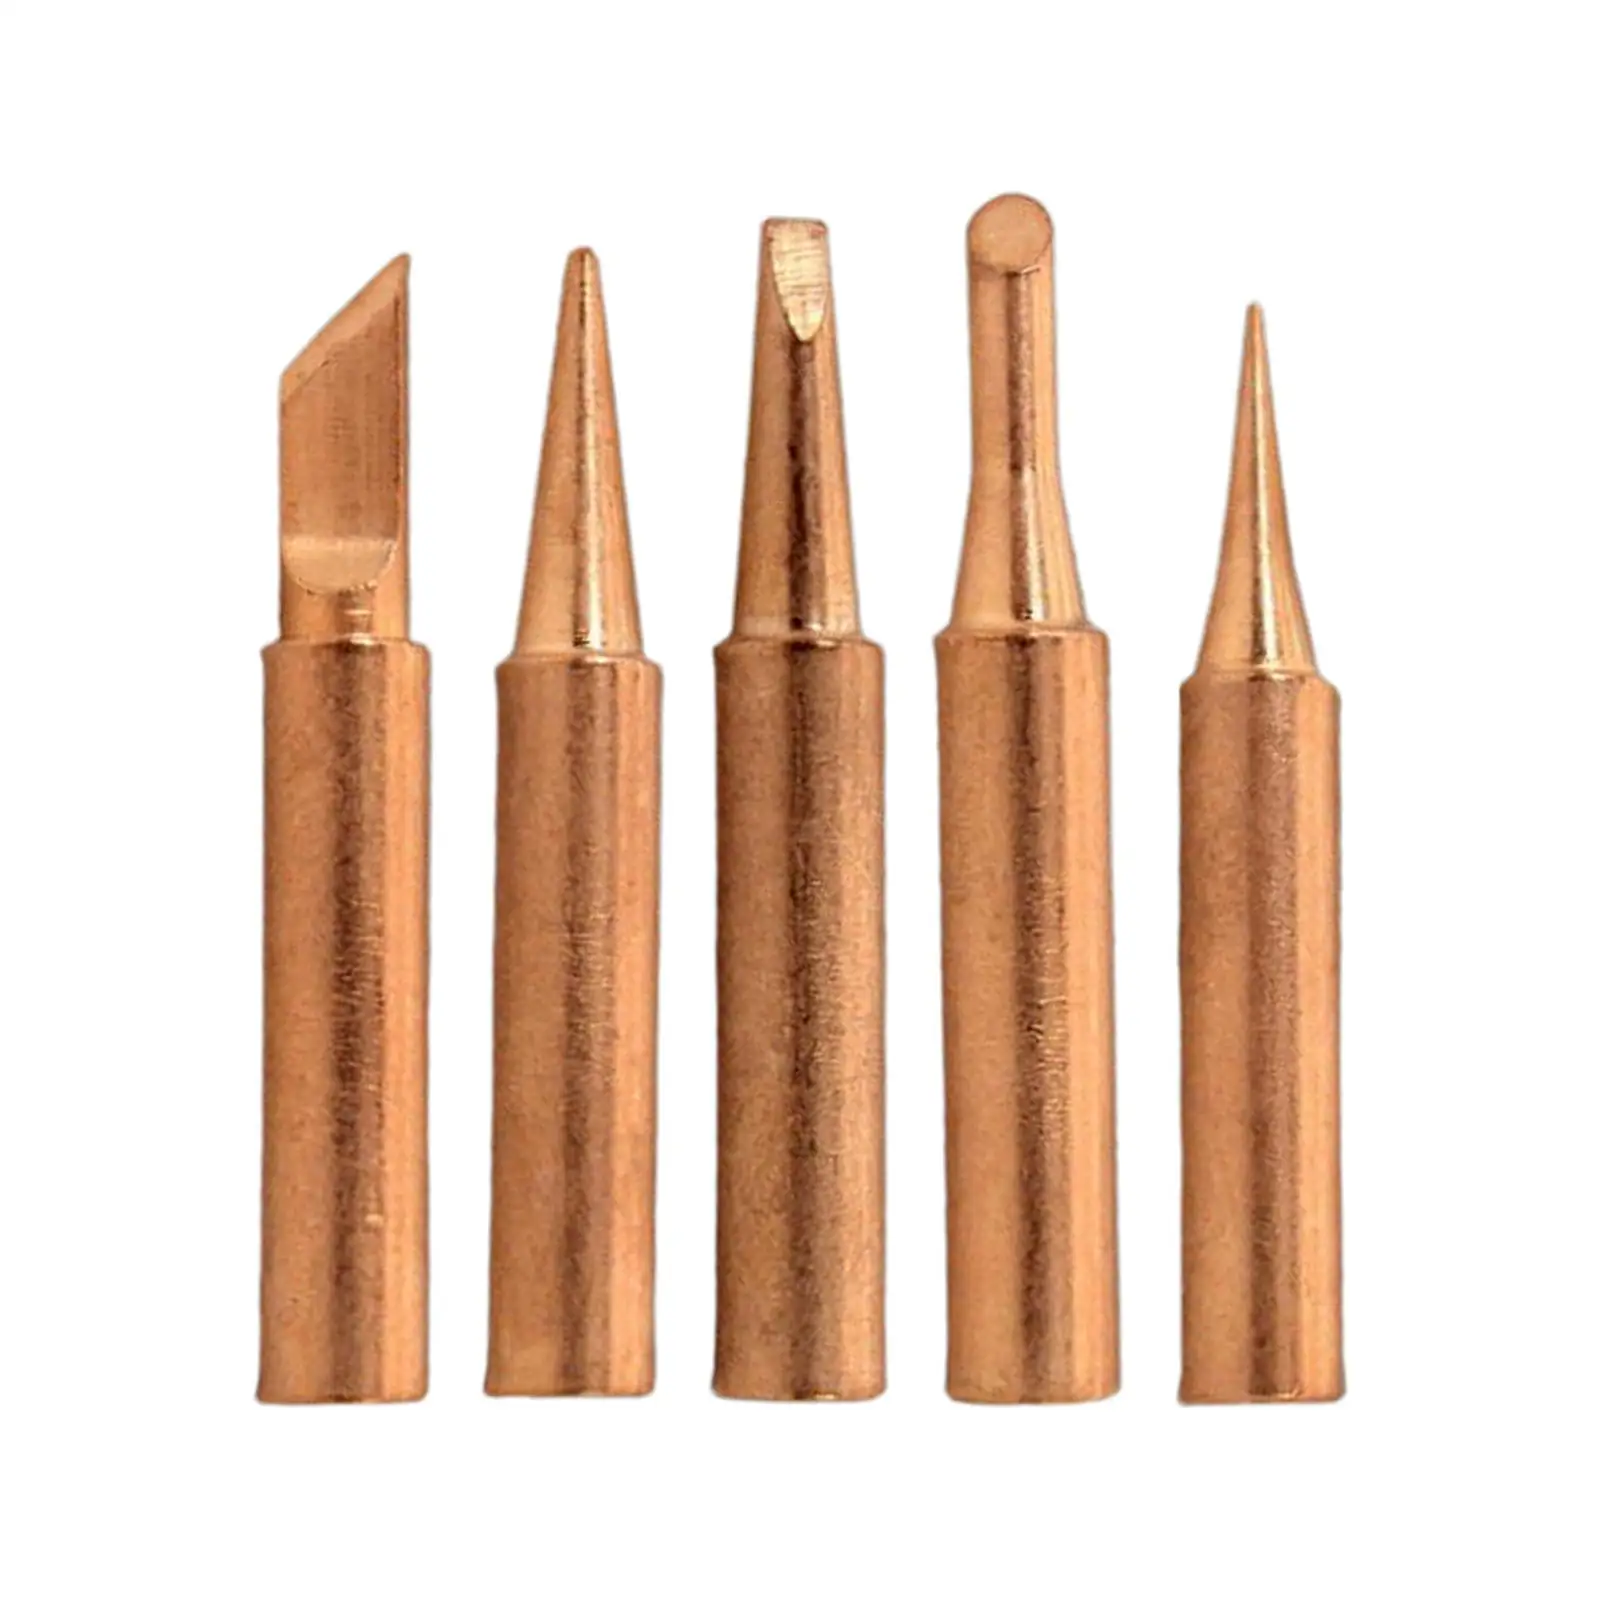 5X Soldering Iron Tips  Soldering Soldering Replaces for 900M 936